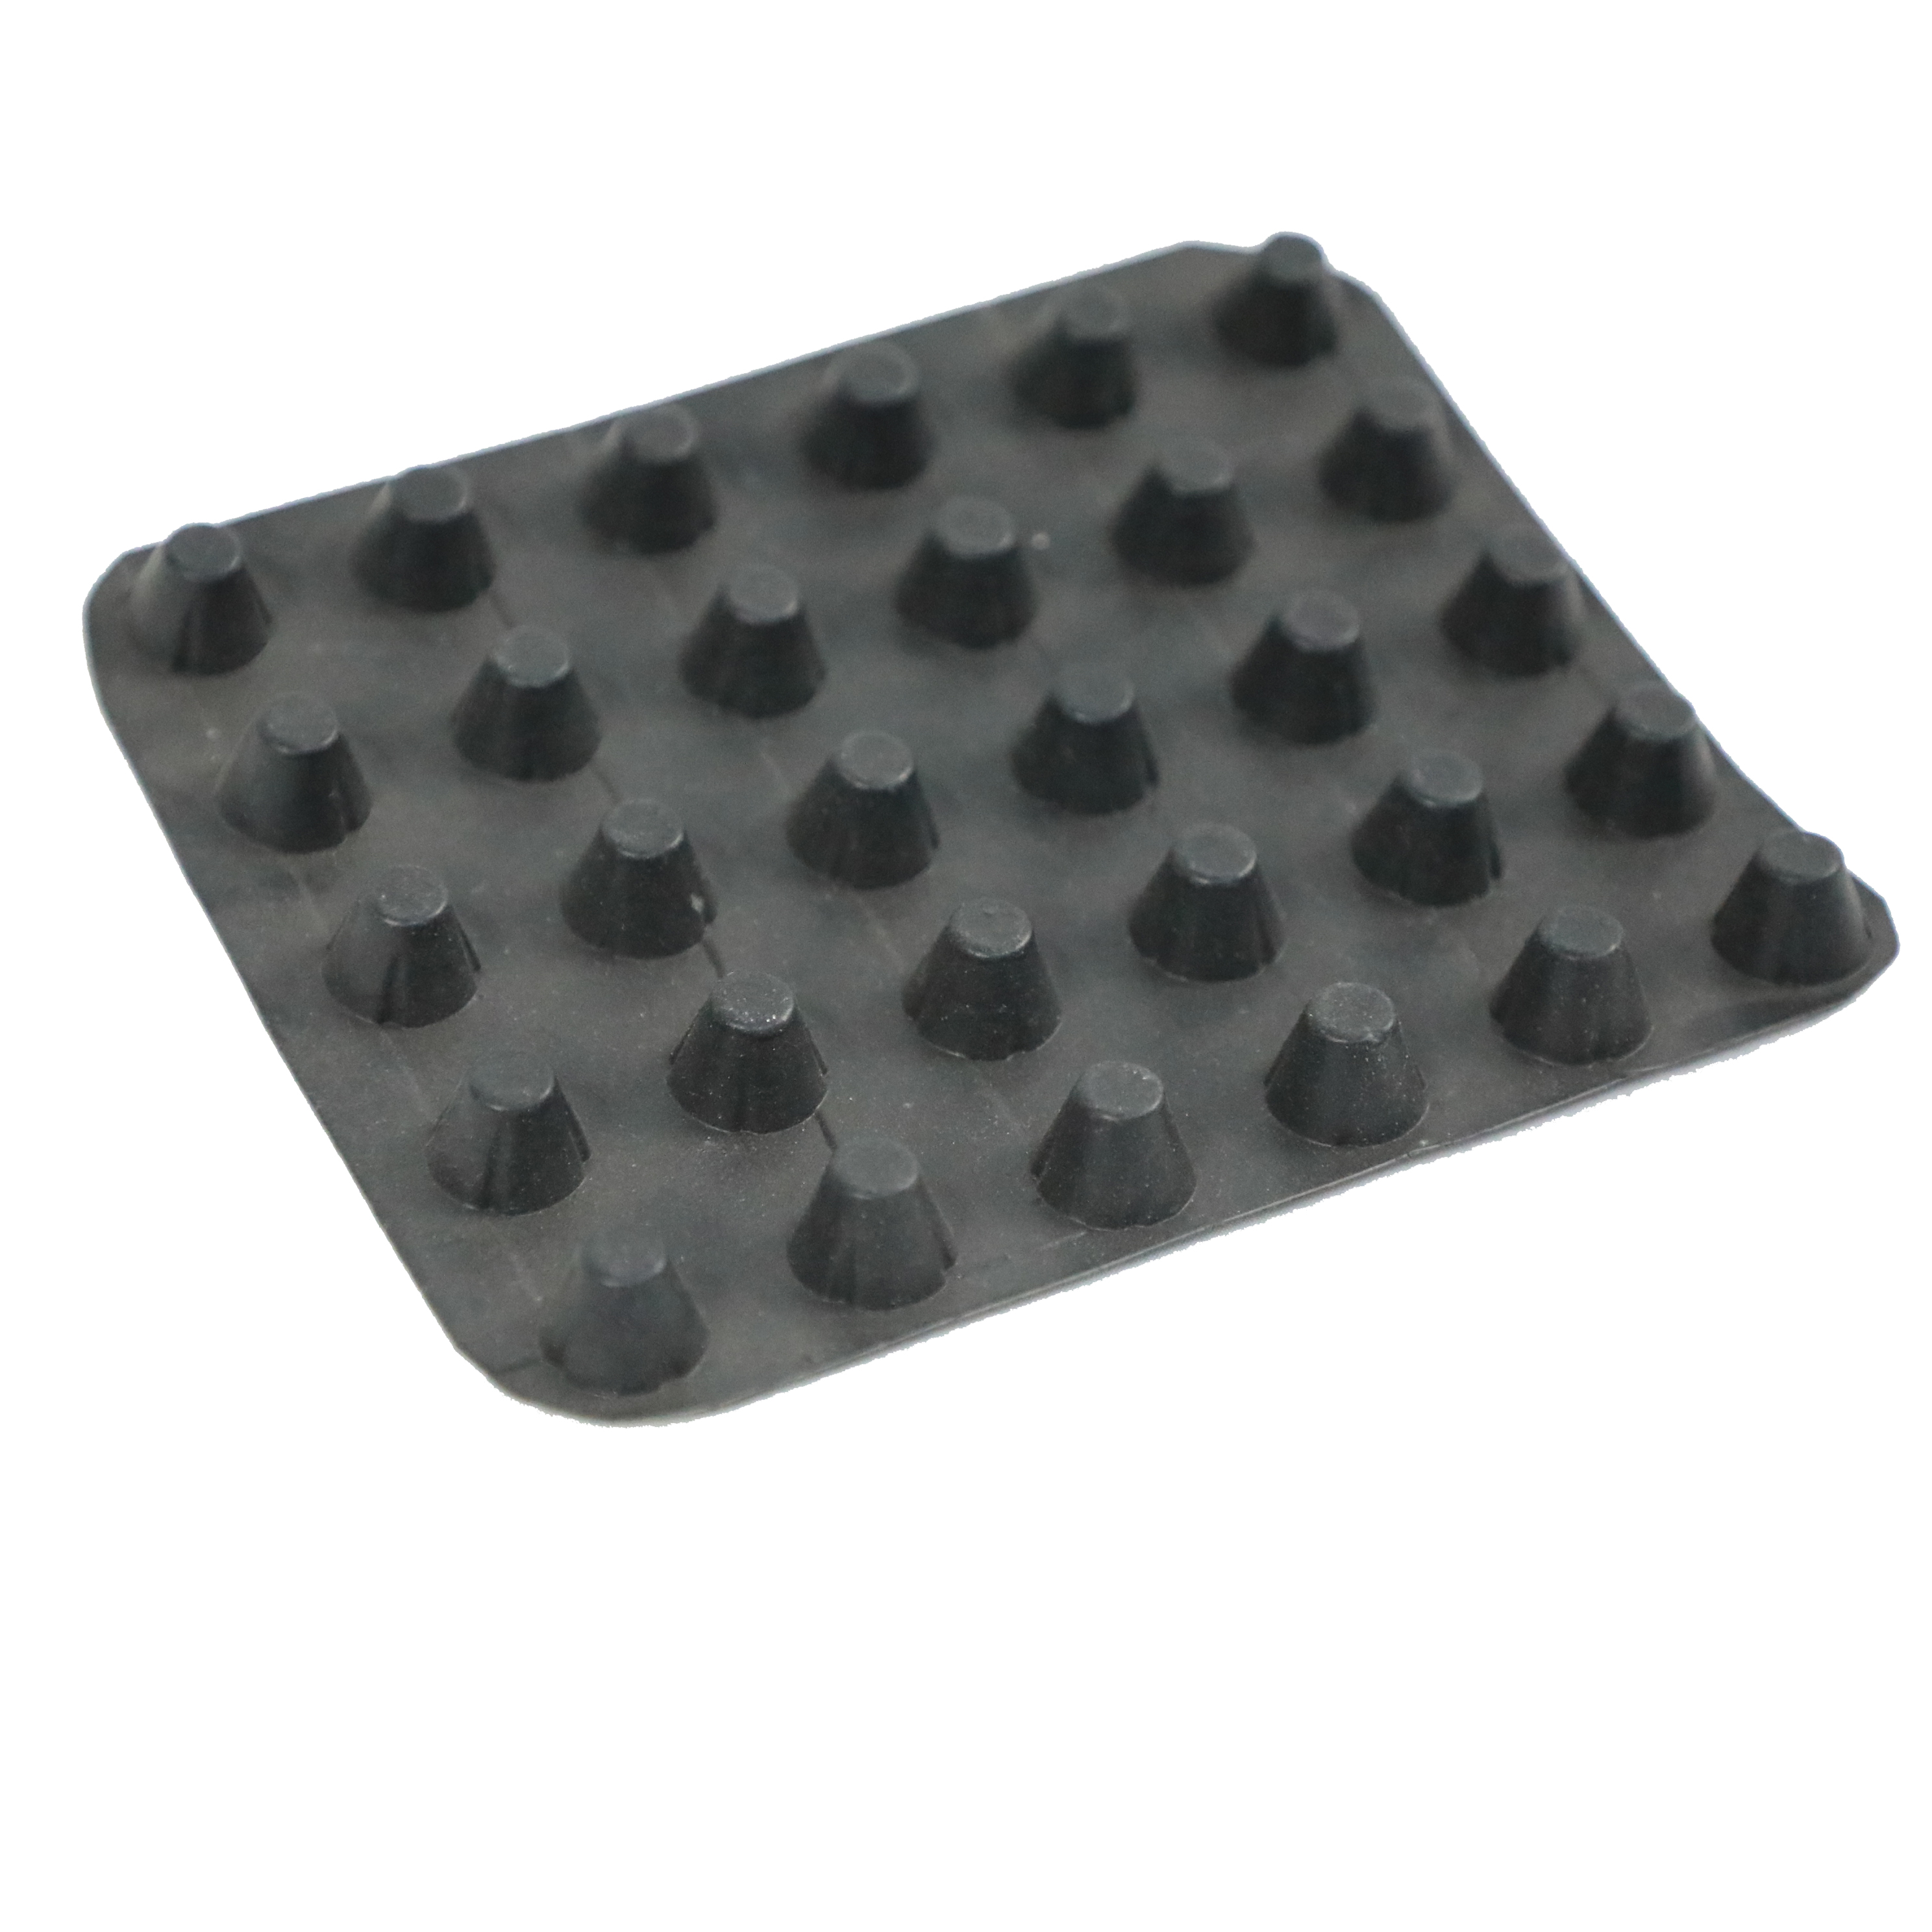 waterproofing 8mm plastic dimple drainage board dimple drain board for roof garden